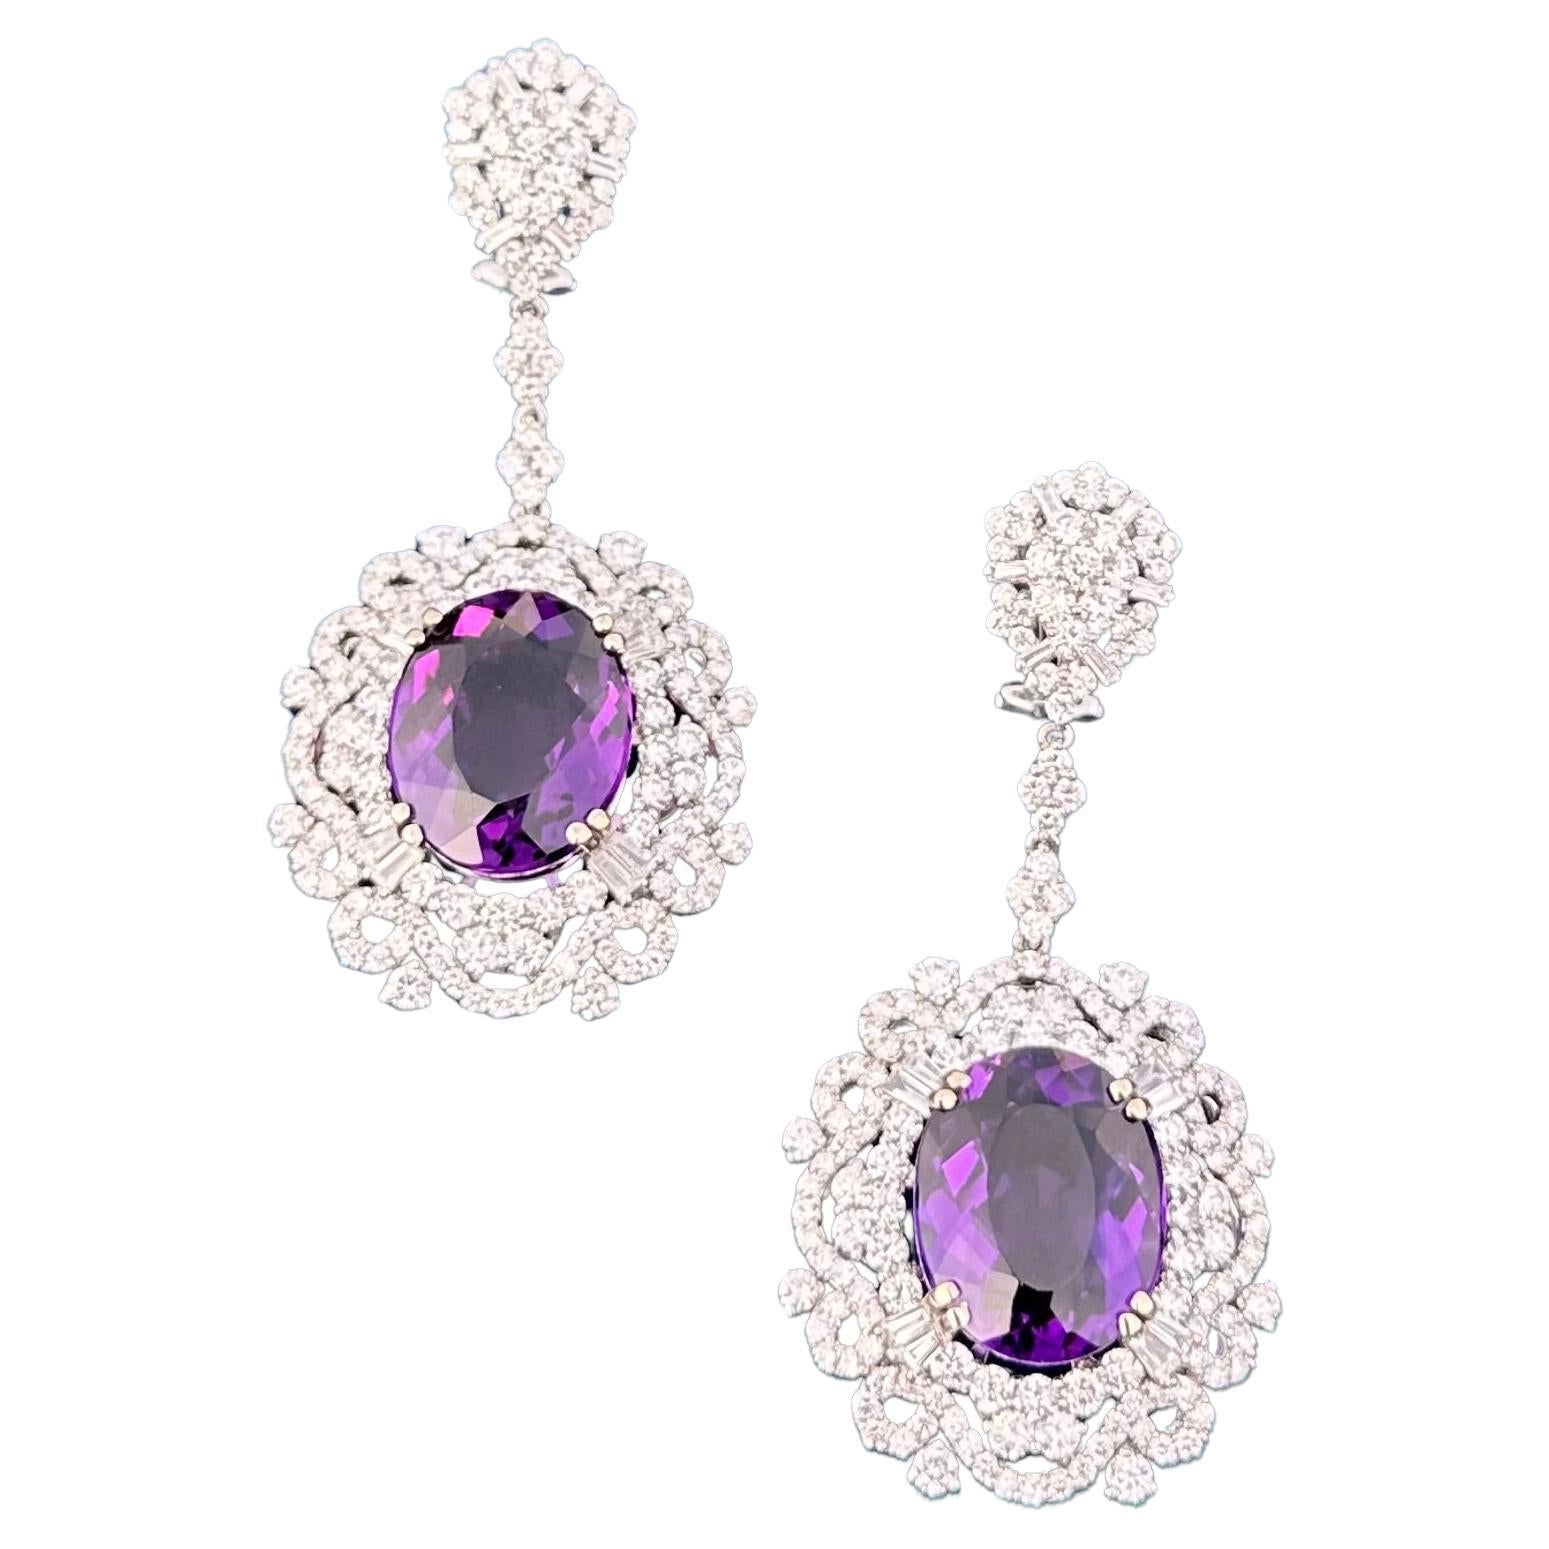 Exquisite Pair of 42.49 Carat Amethyst and Diamond 18K White Gold Earrings